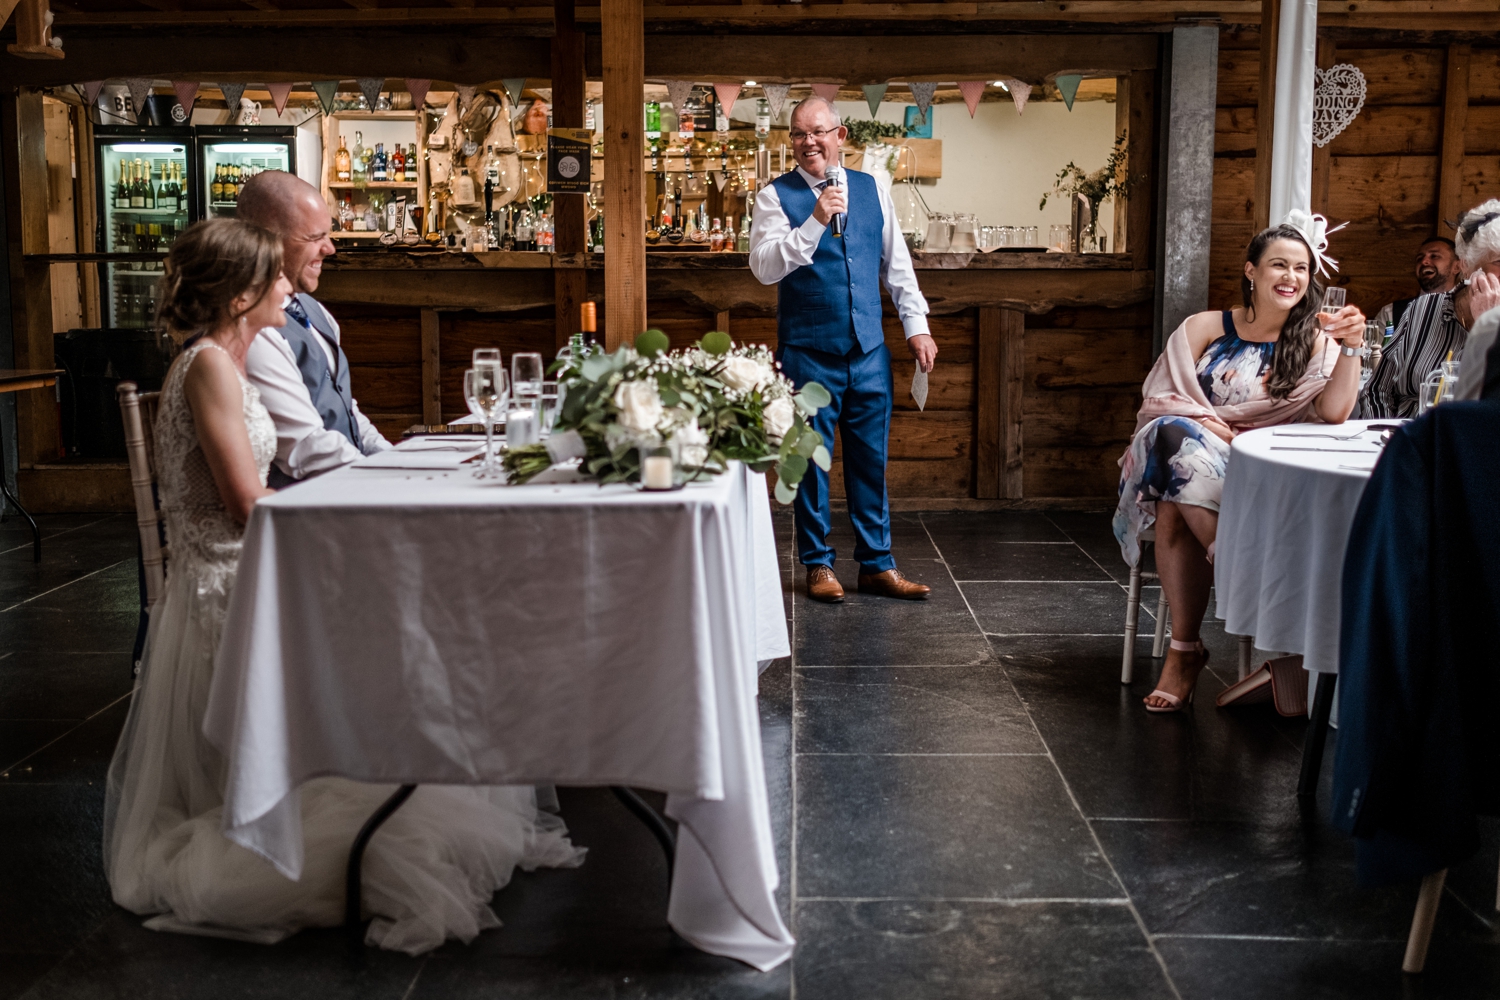 Wedding speeches at Woodhouse Barn